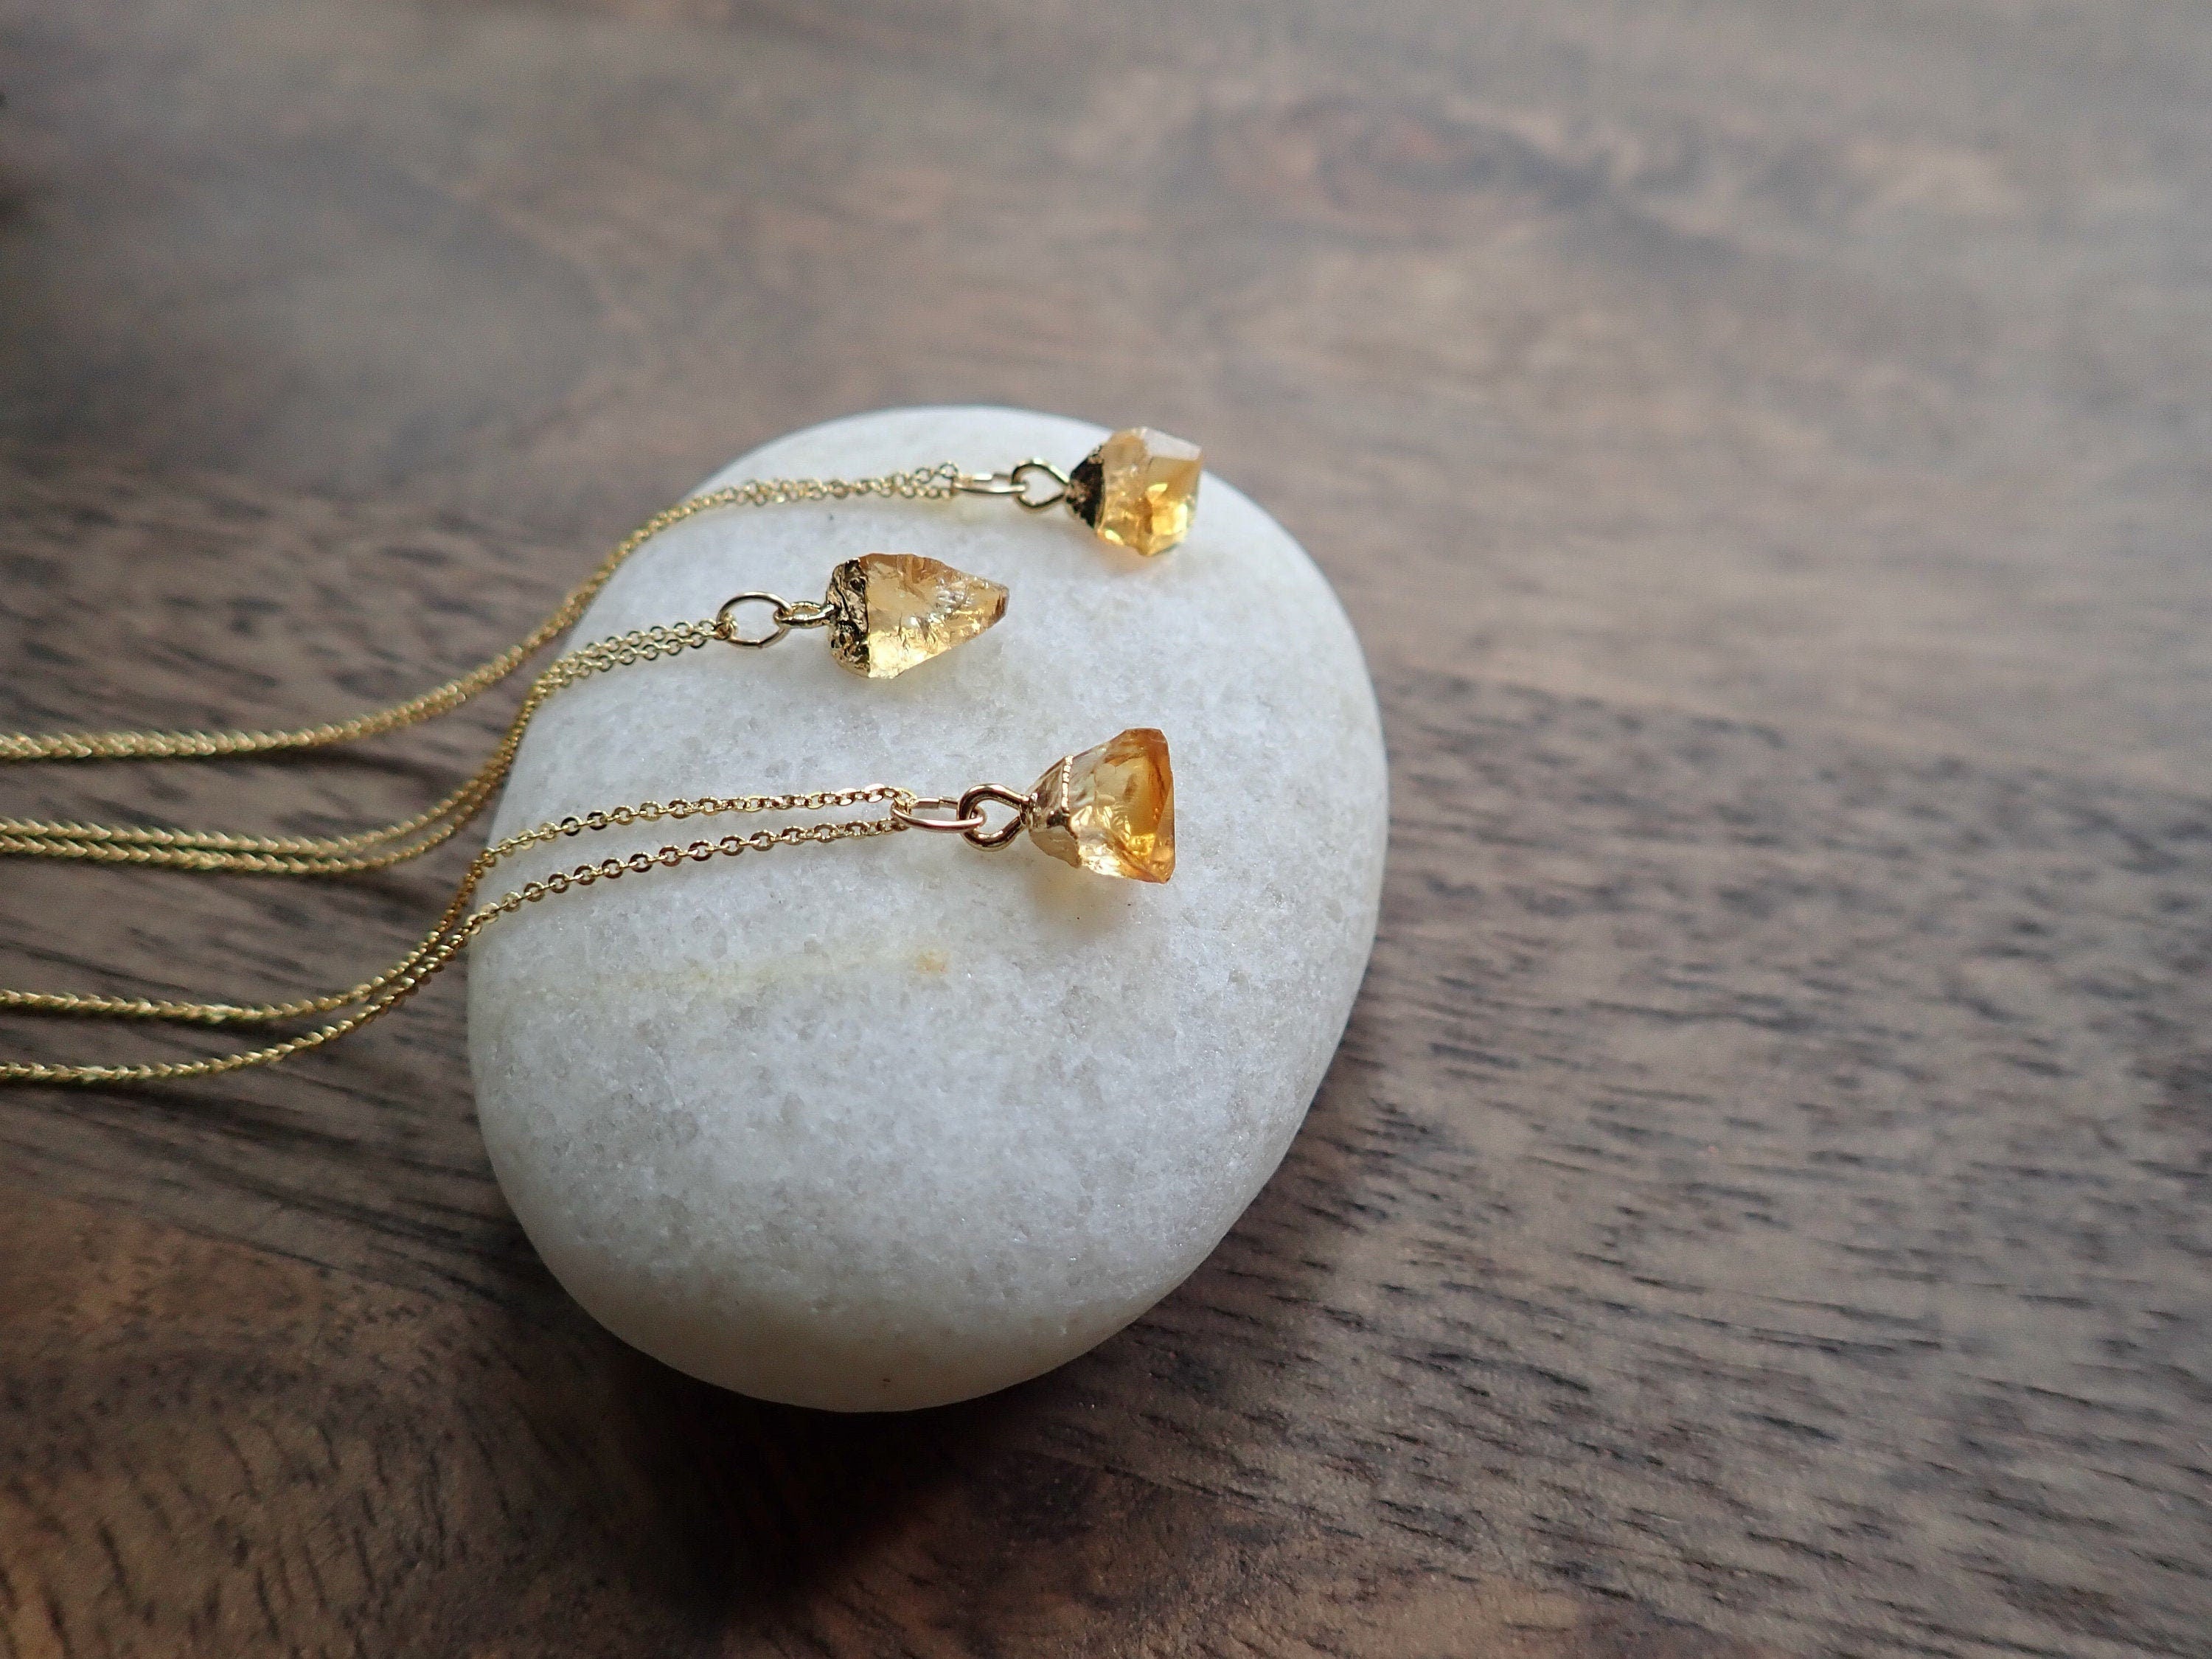 Citrine Crystal Necklace, Handmade & Ethically Sourced Raw Stone Necklace  with Citrine Pendant Gem